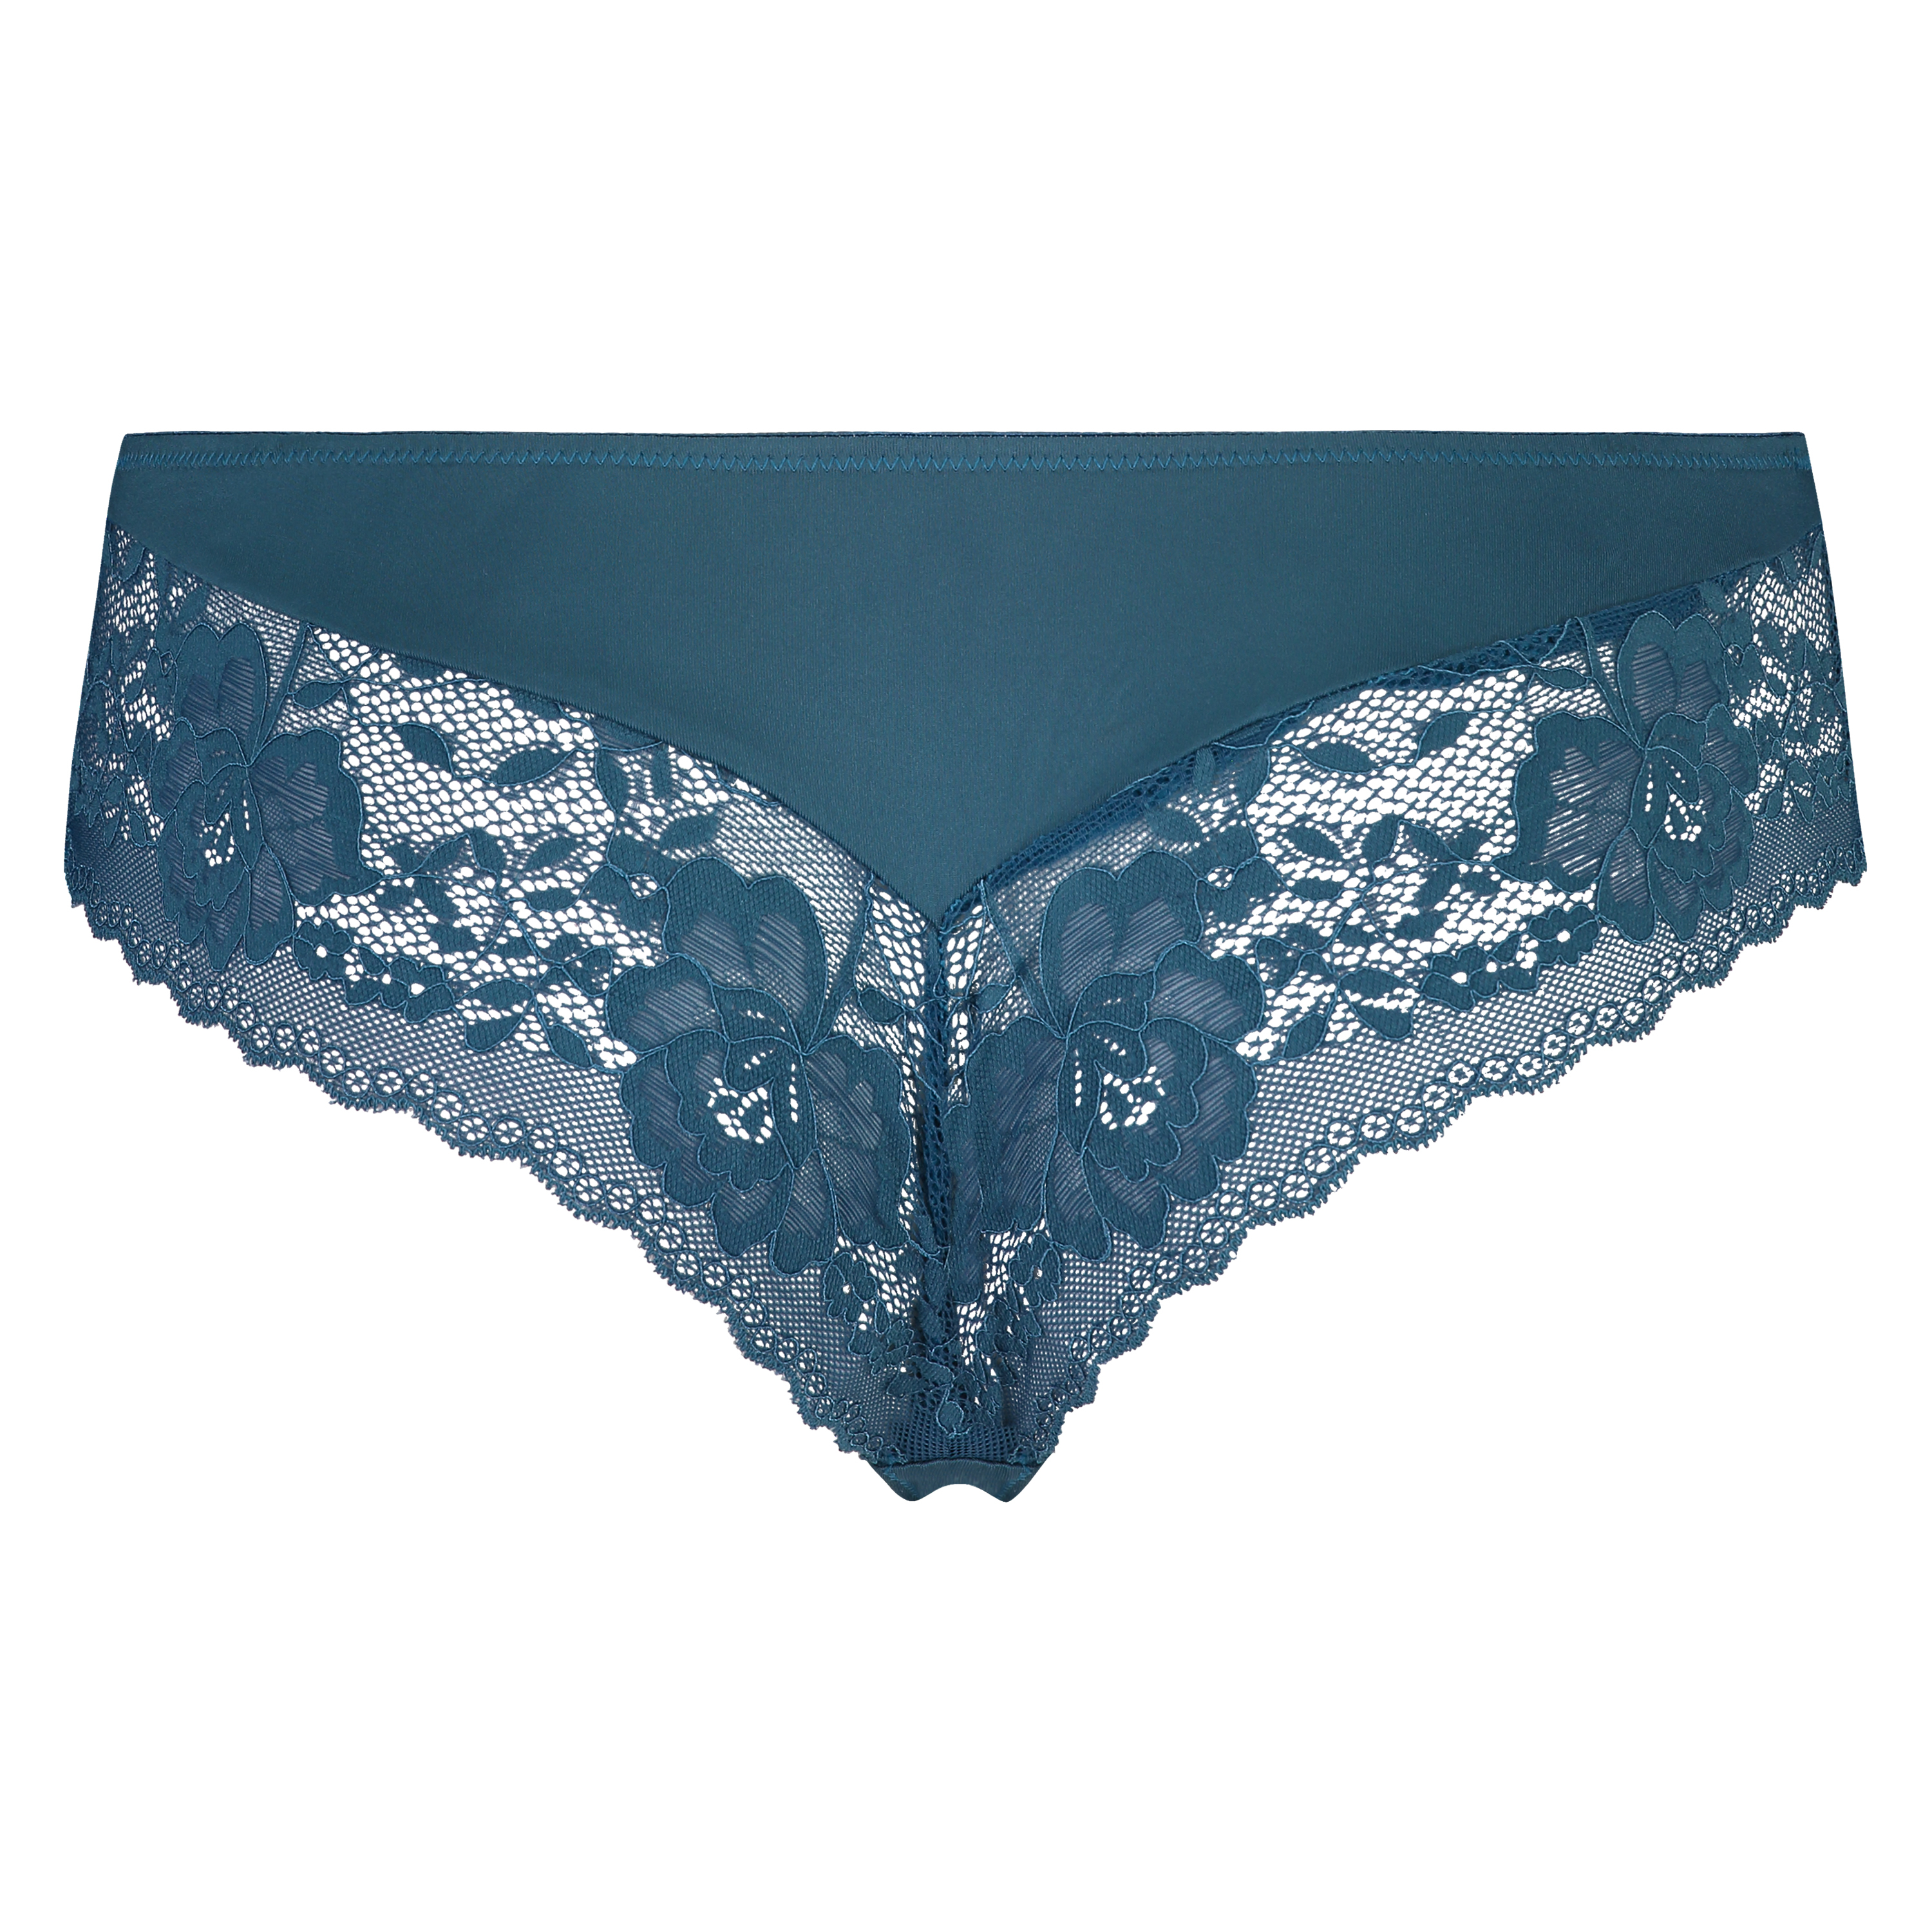 3 Pack Blue Lace Brazilian Knickers, Brand : Matalan, Color: Blue, Size: 14